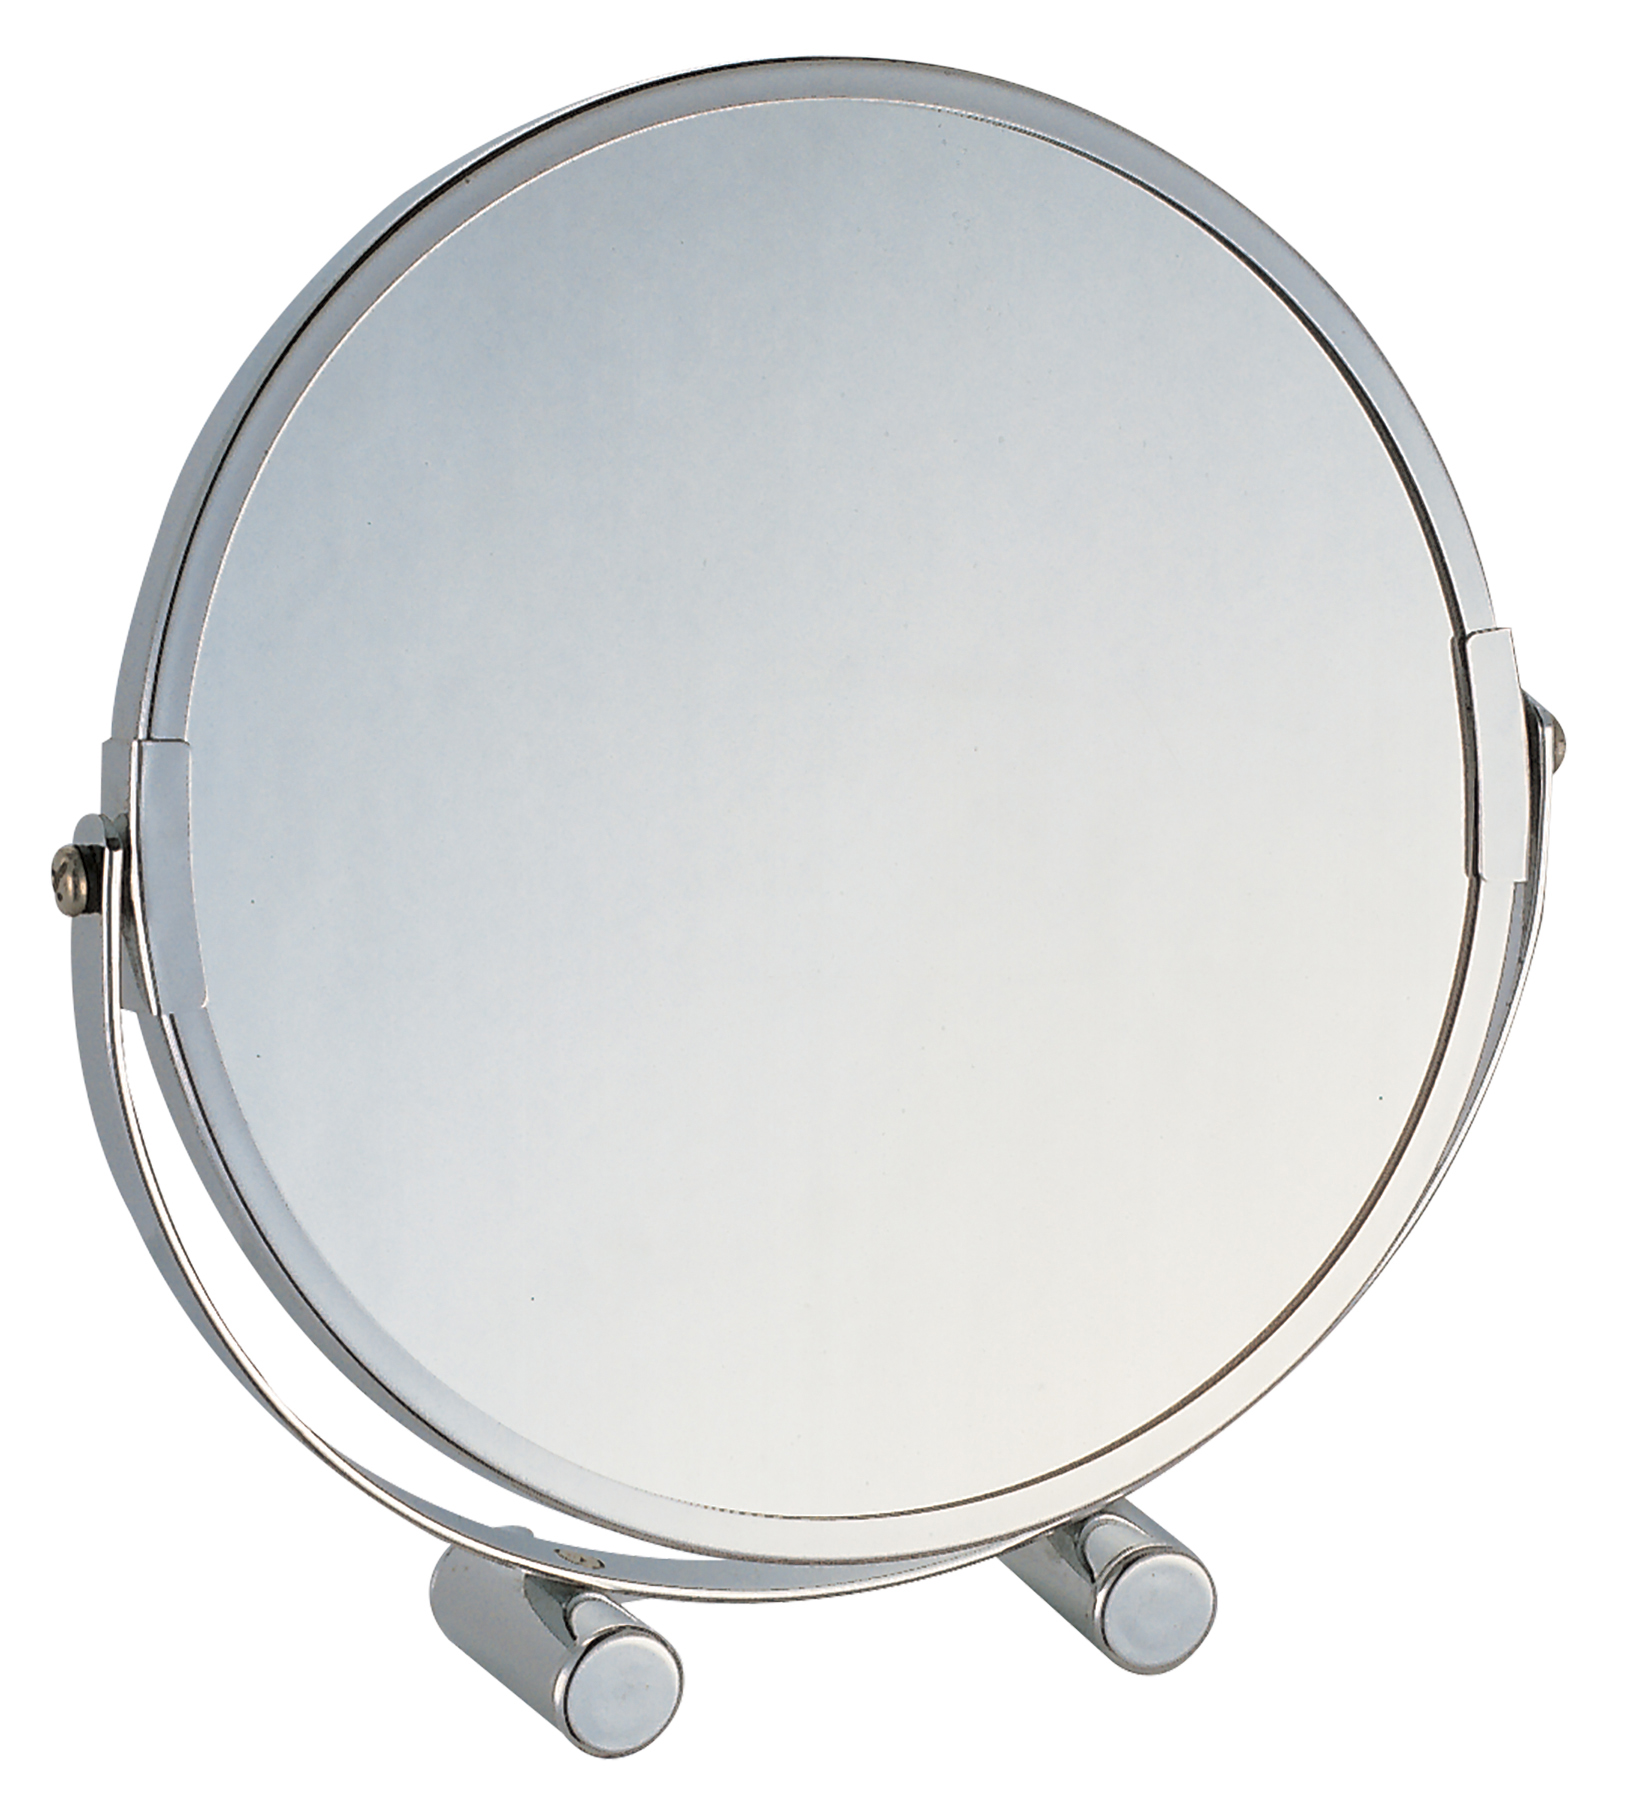 ELLE The Parisians Lifestyle Collection Double-Sided Chrome MIRRORs